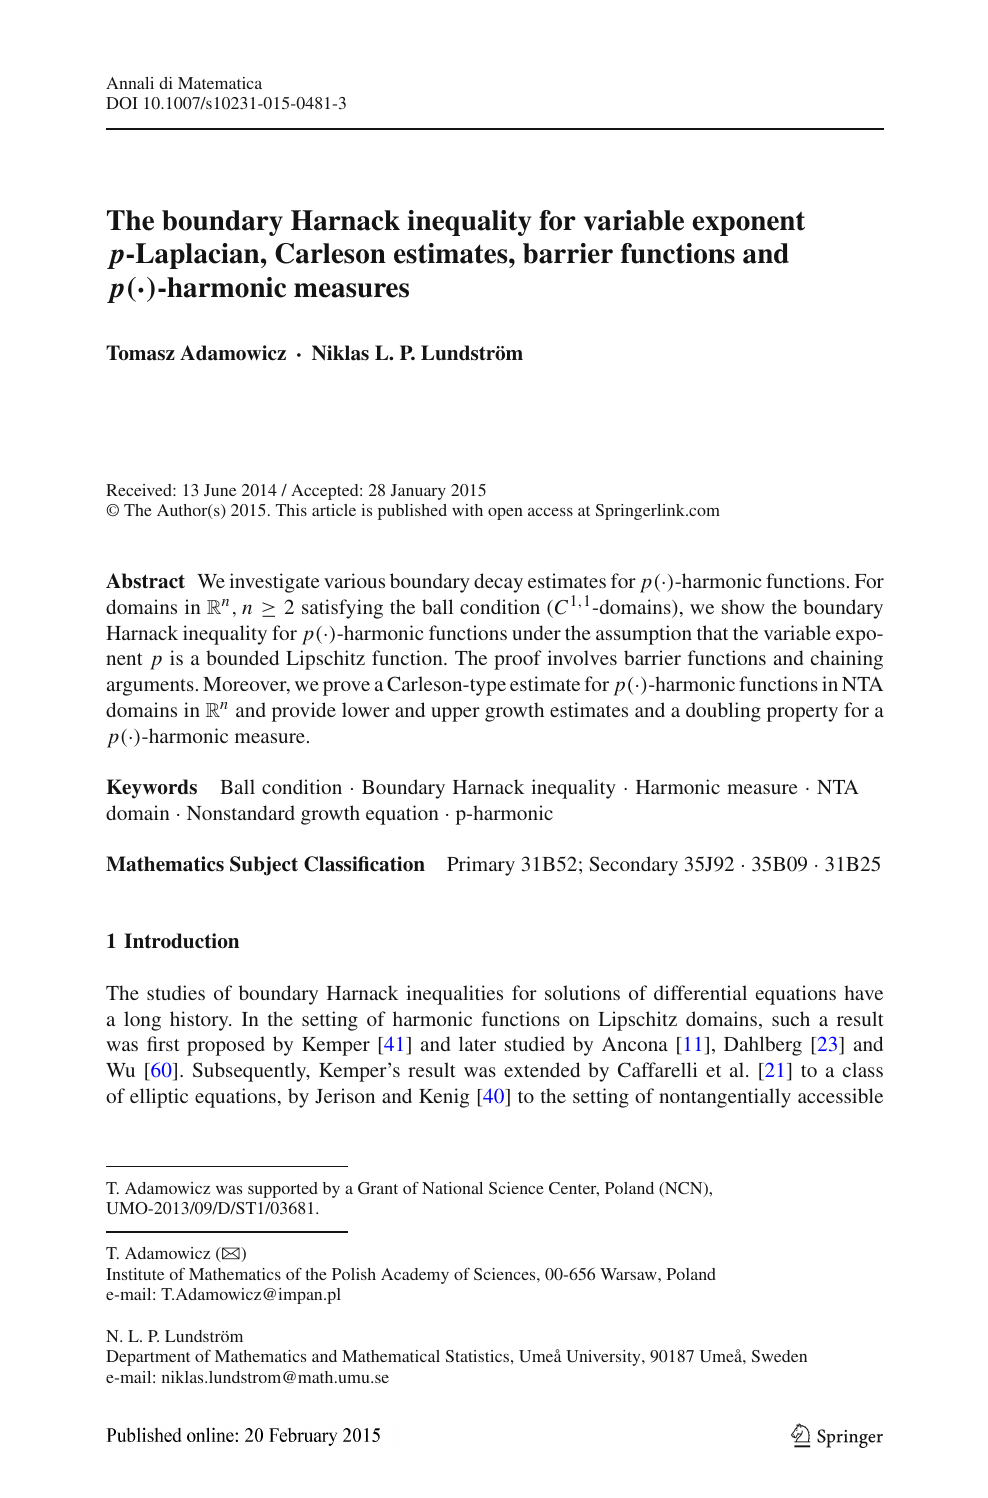 The Boundary Harnack Inequality For Variable Exponent P P Laplacian Carleson Estimates Barrier Functions And P Cdot P Harmonic Measures Topic Of Research Paper In Mathematics Download Scholarly